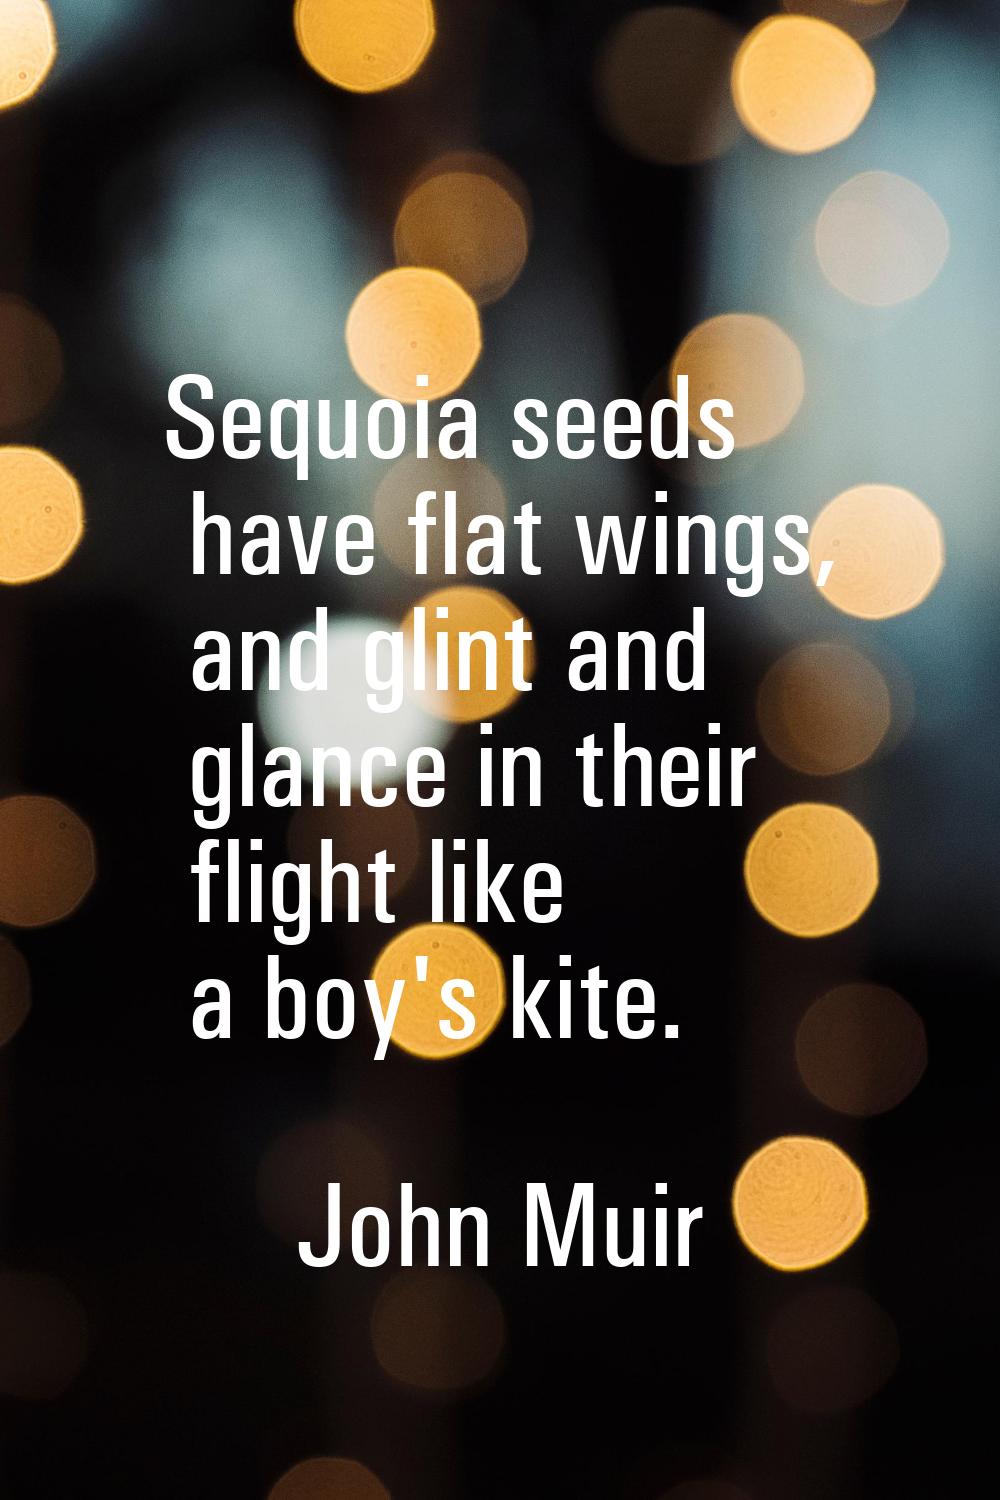 Sequoia seeds have flat wings, and glint and glance in their flight like a boy's kite.